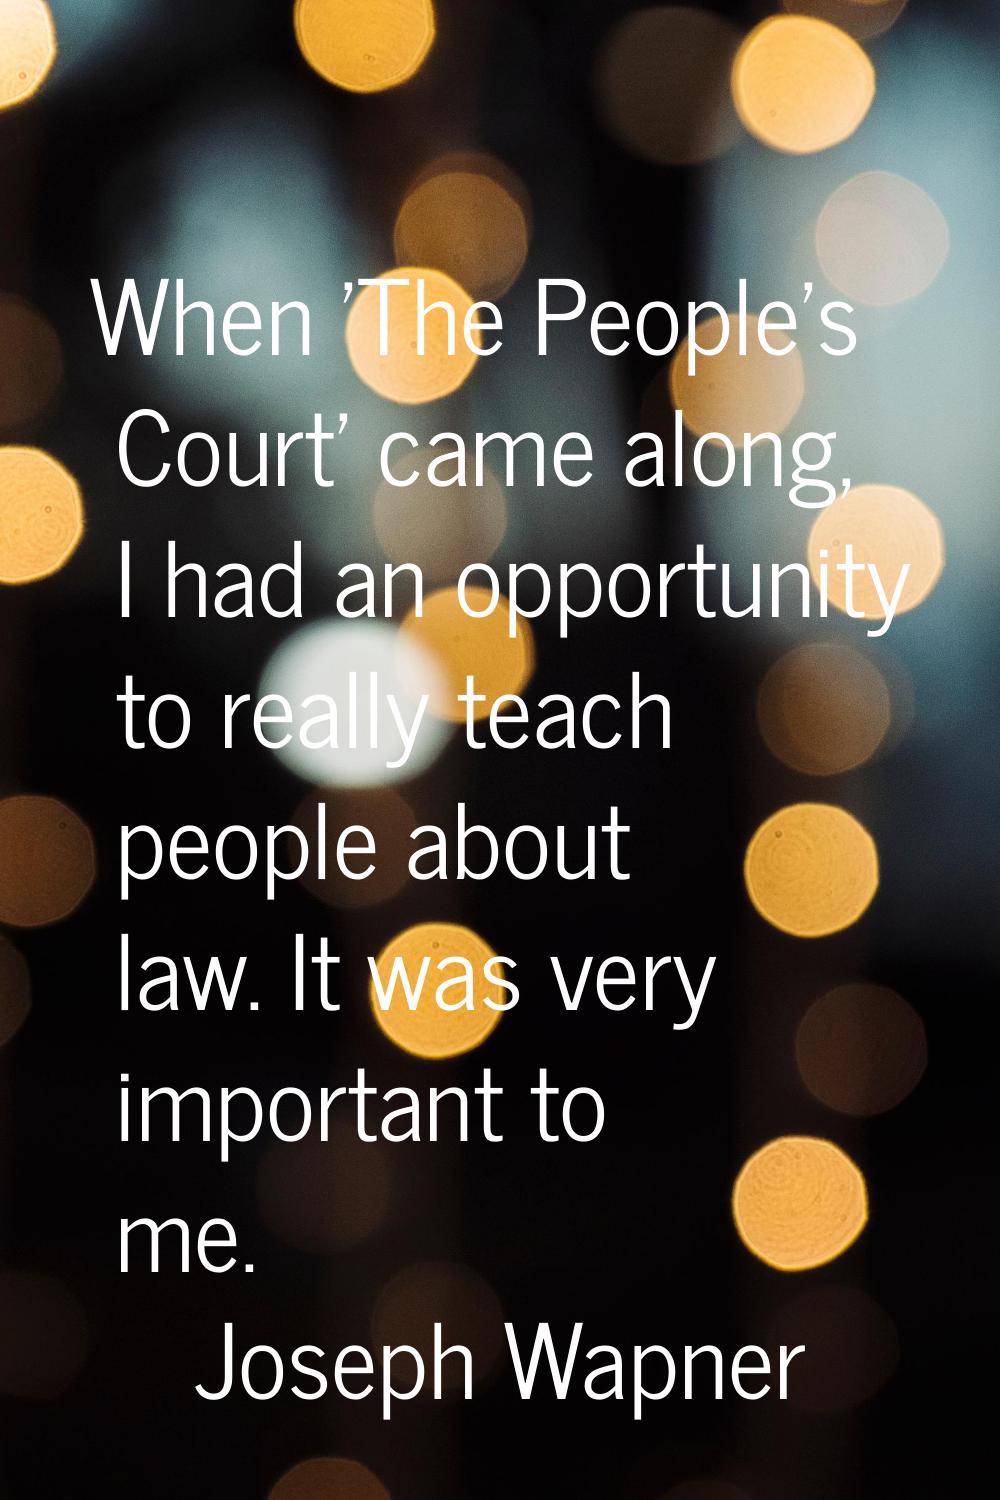 When 'The People's Court' came along, I had an opportunity to really teach people about law. It was